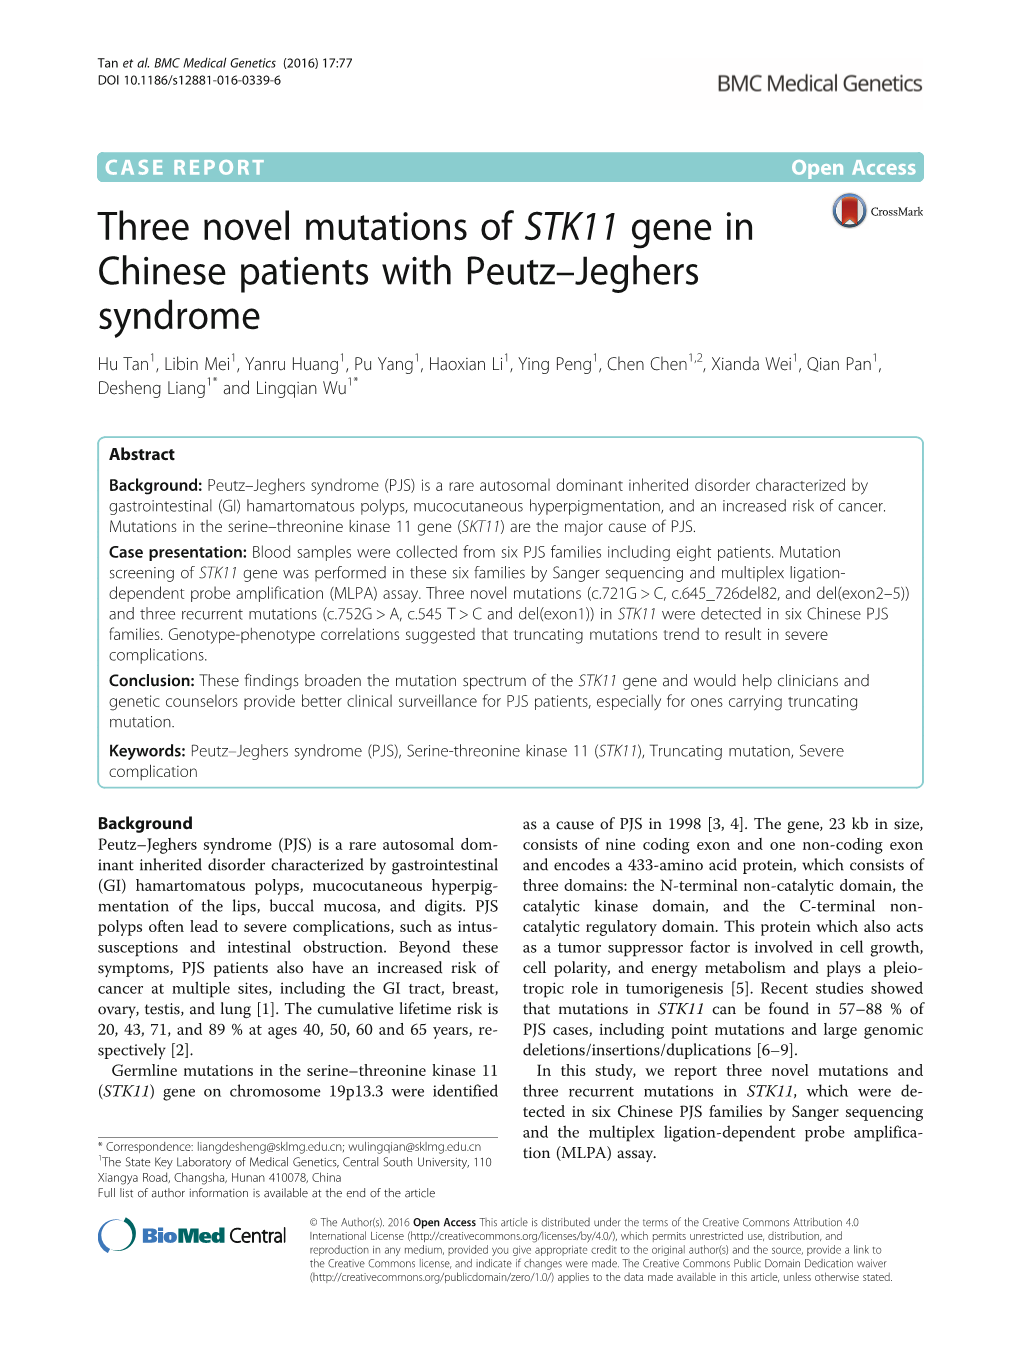 Three Novel Mutations of STK11 Gene in Chinese Patients with Peutz